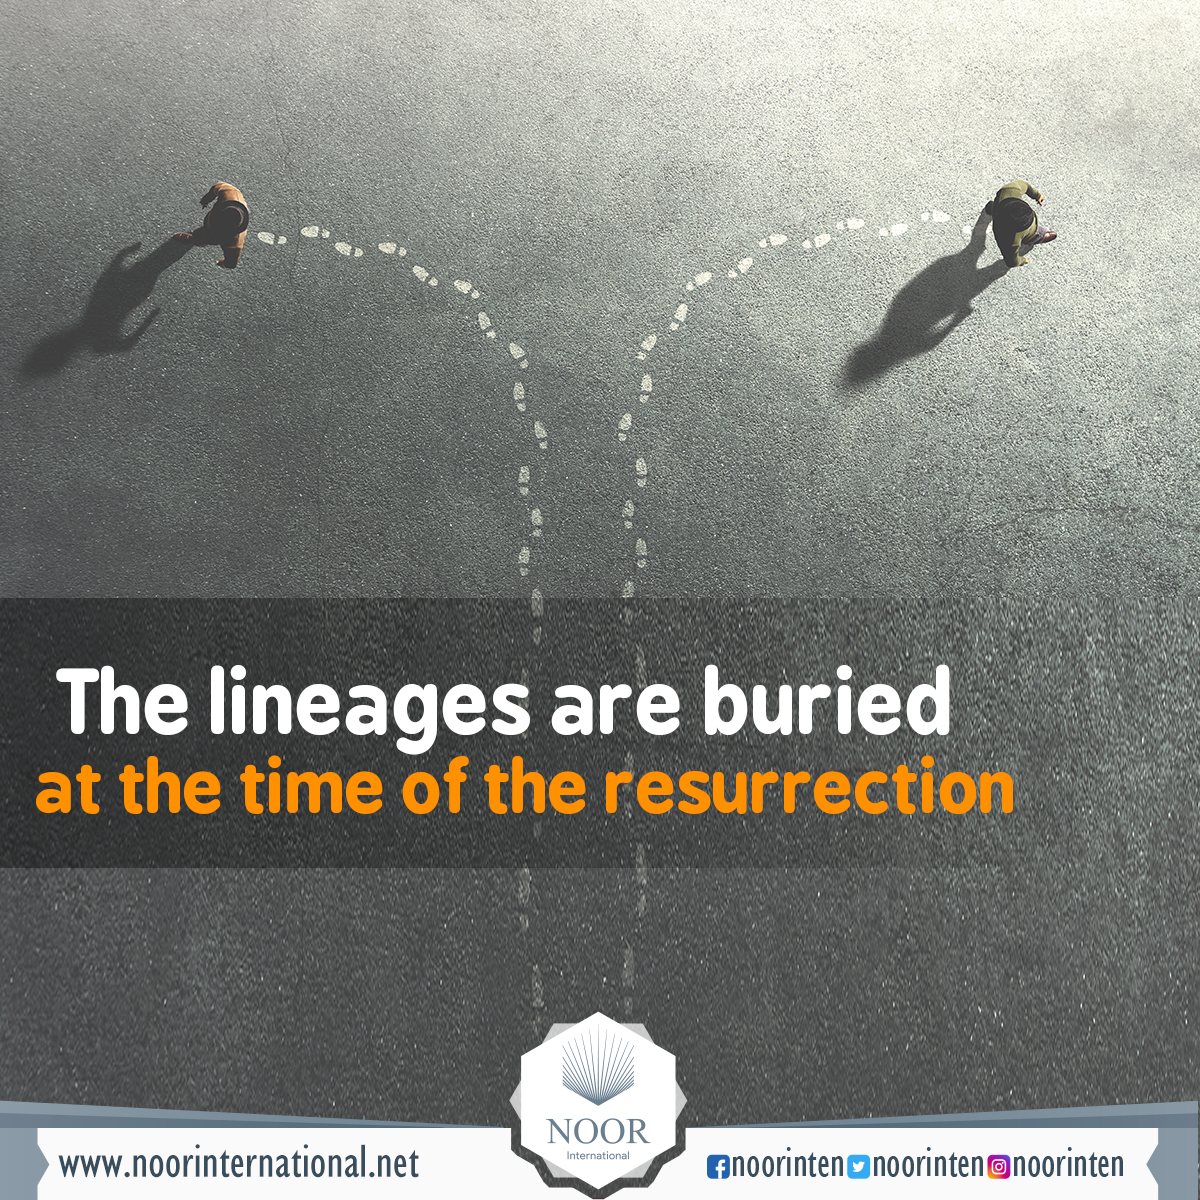 The lineages are buried at the time of the resurrection